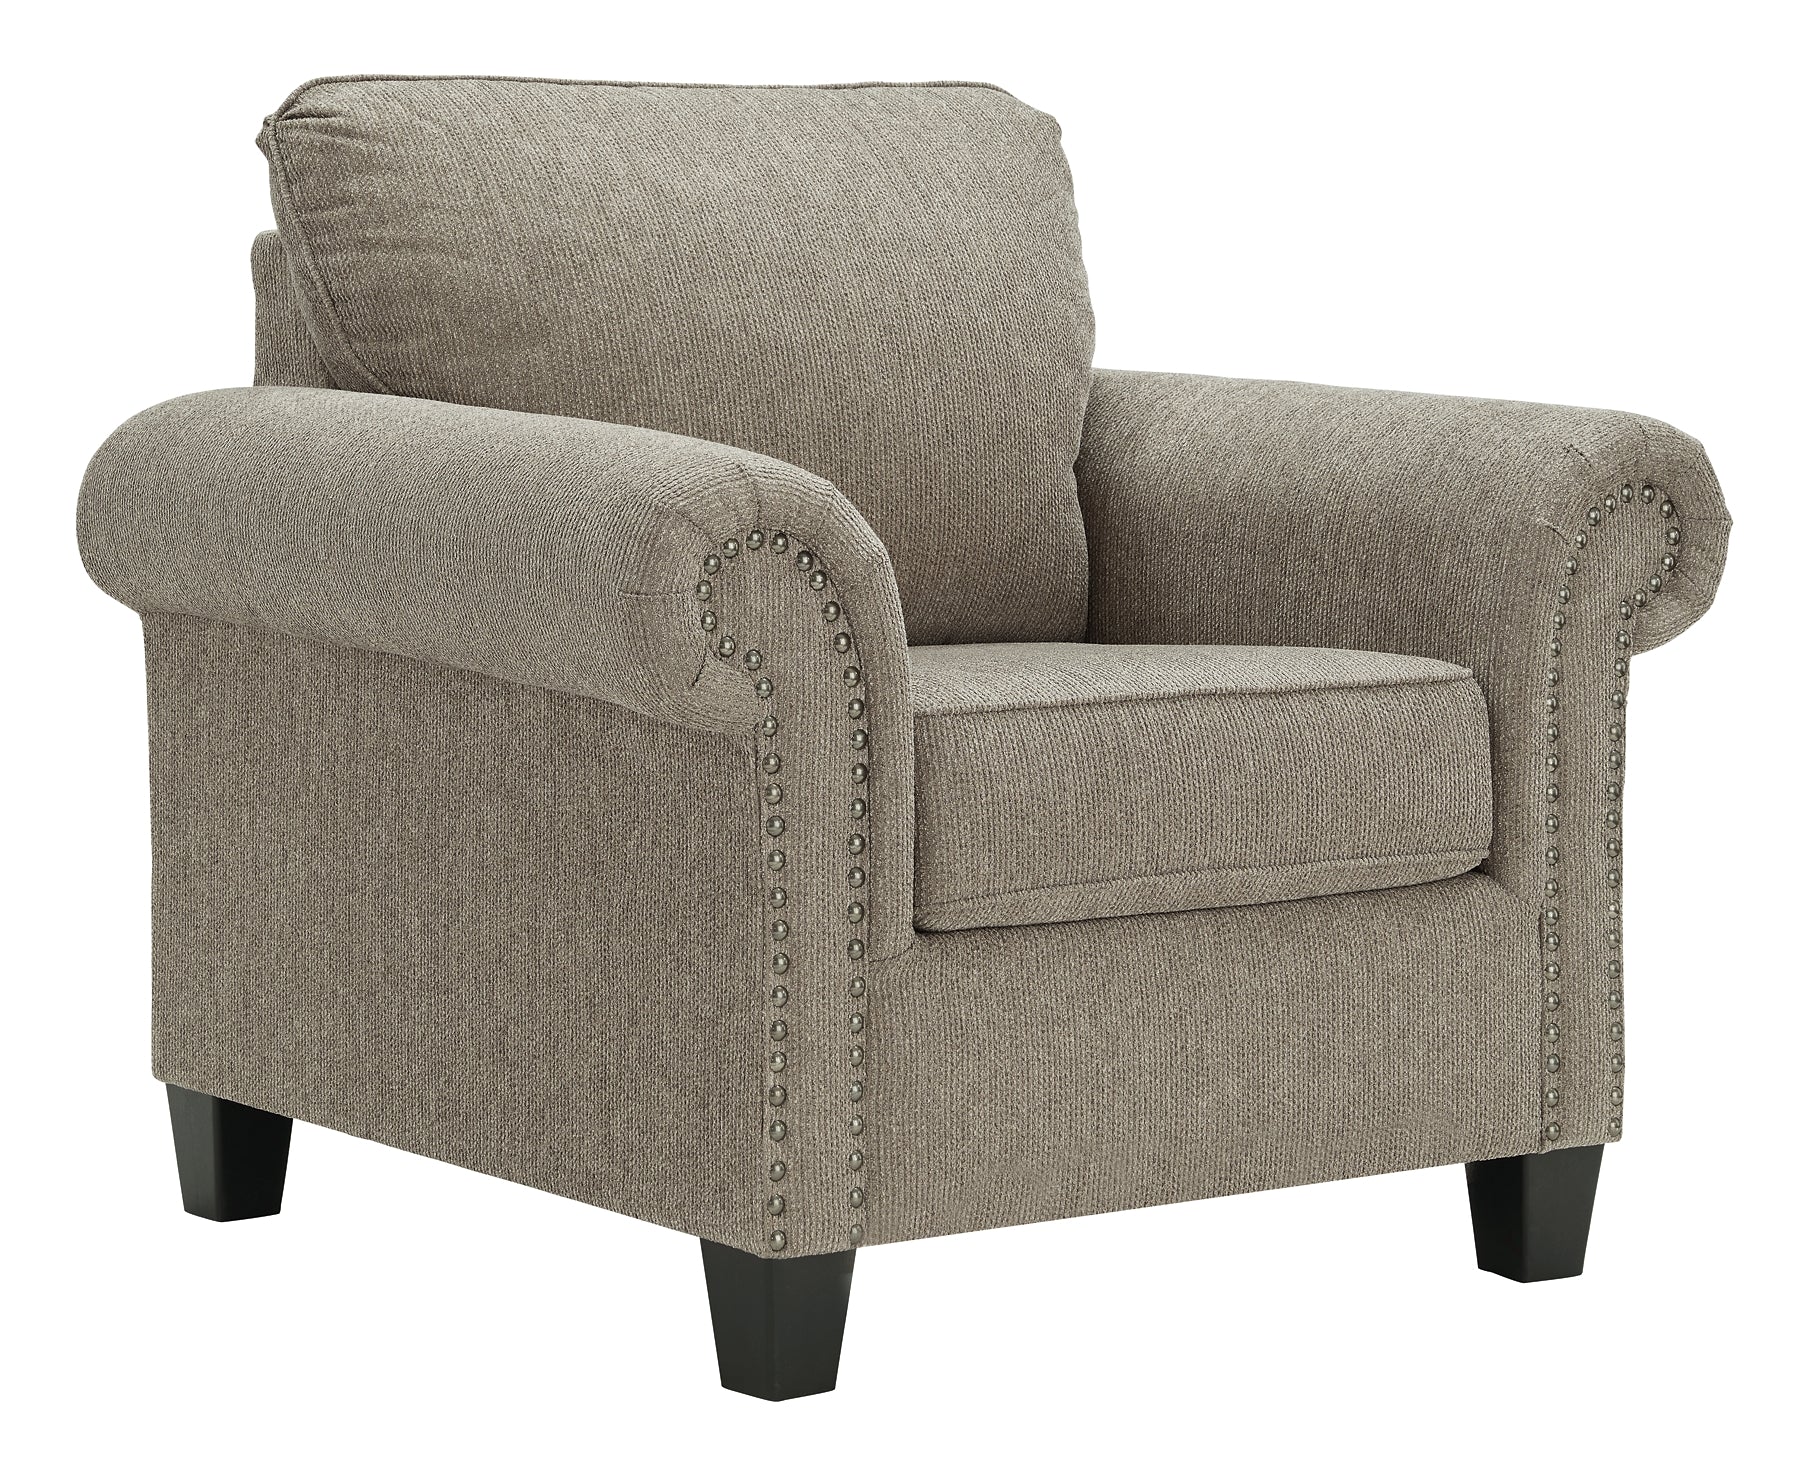 Shewsbury Chair Smyrna Furniture Outlet